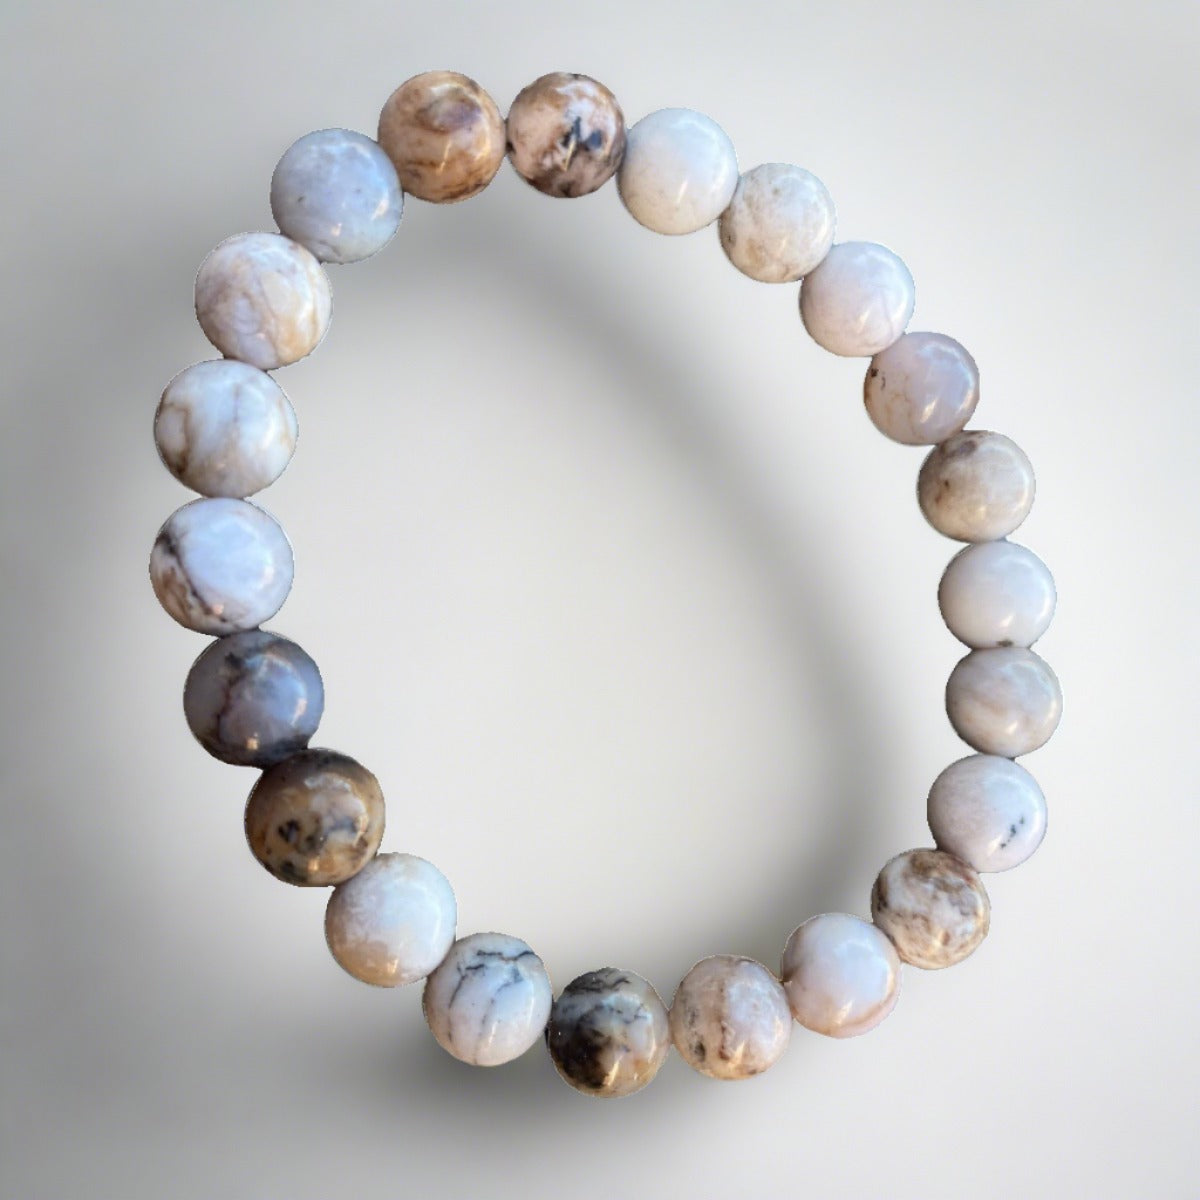 Smoky dendritic opal stretch cord bracelet for serenity and healing